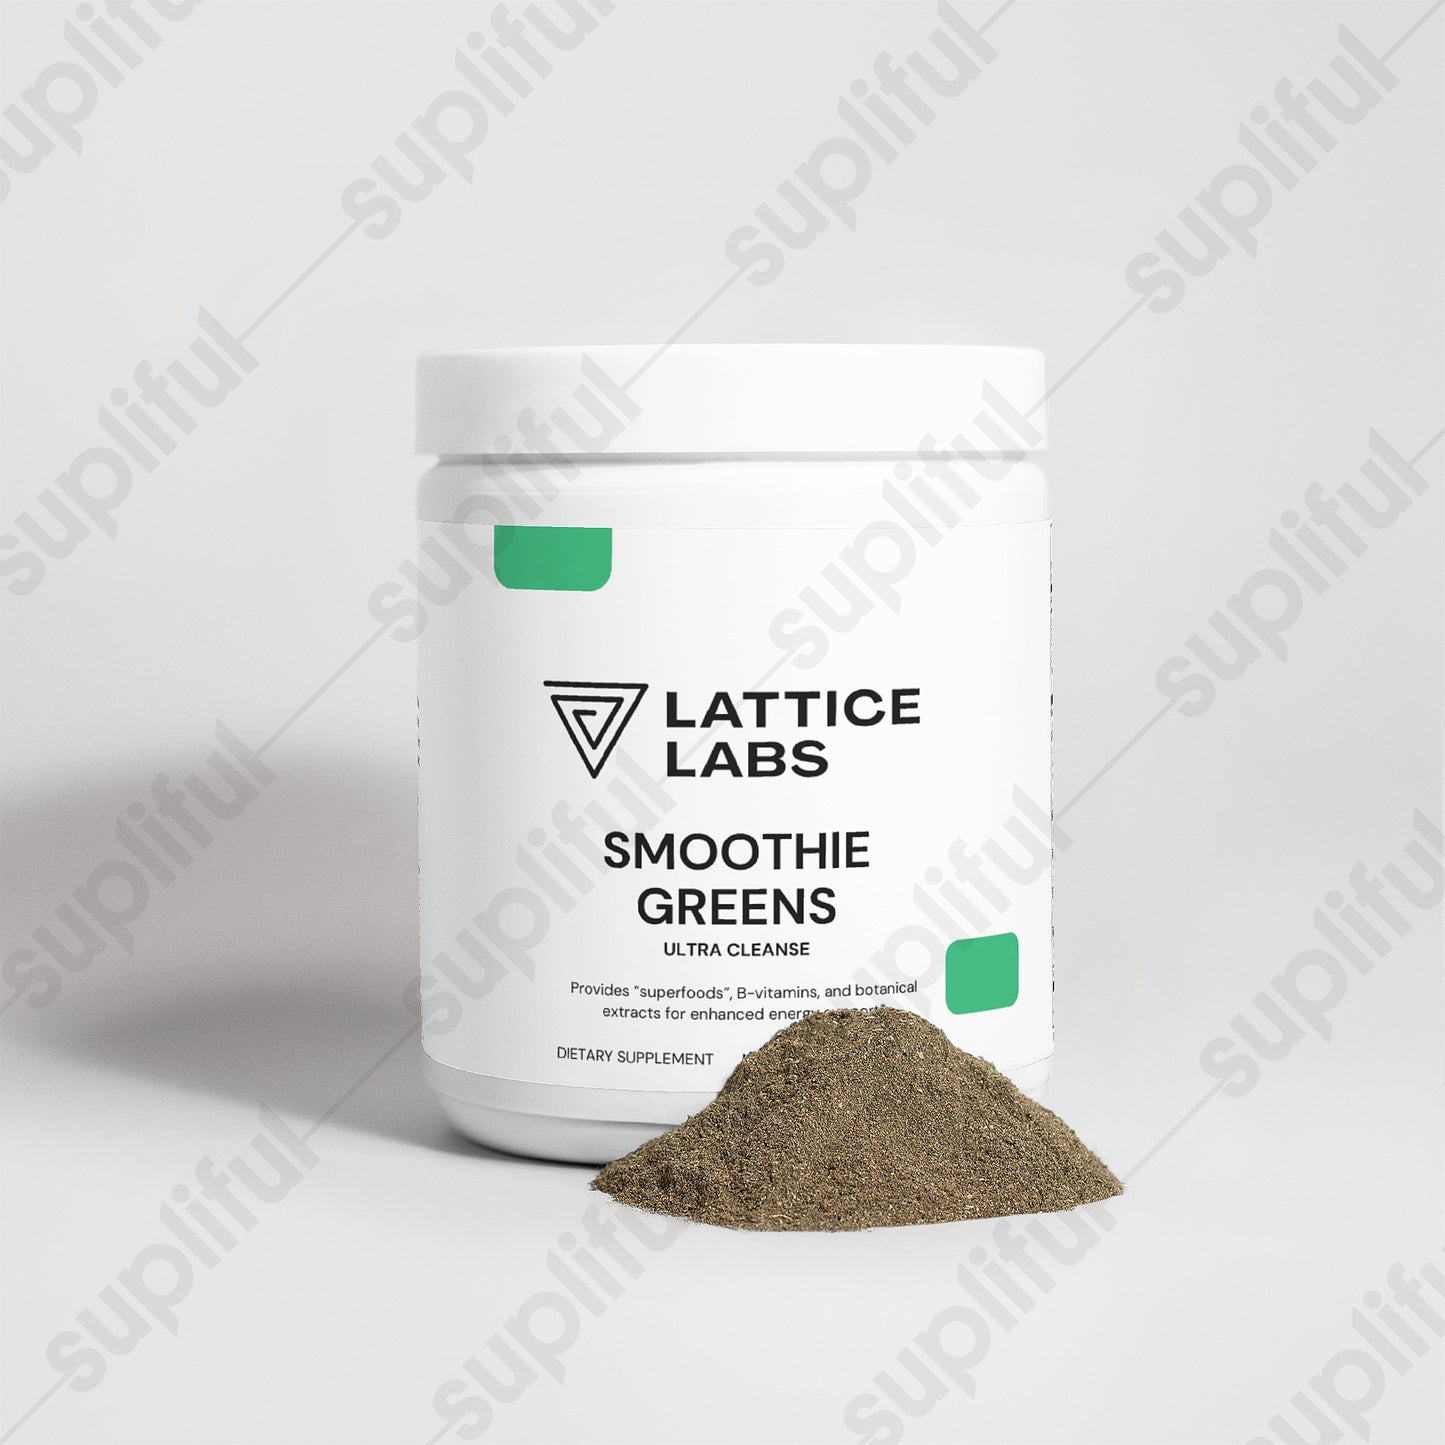 Lattice Labs Ultra Cleanse Smoothie Greens